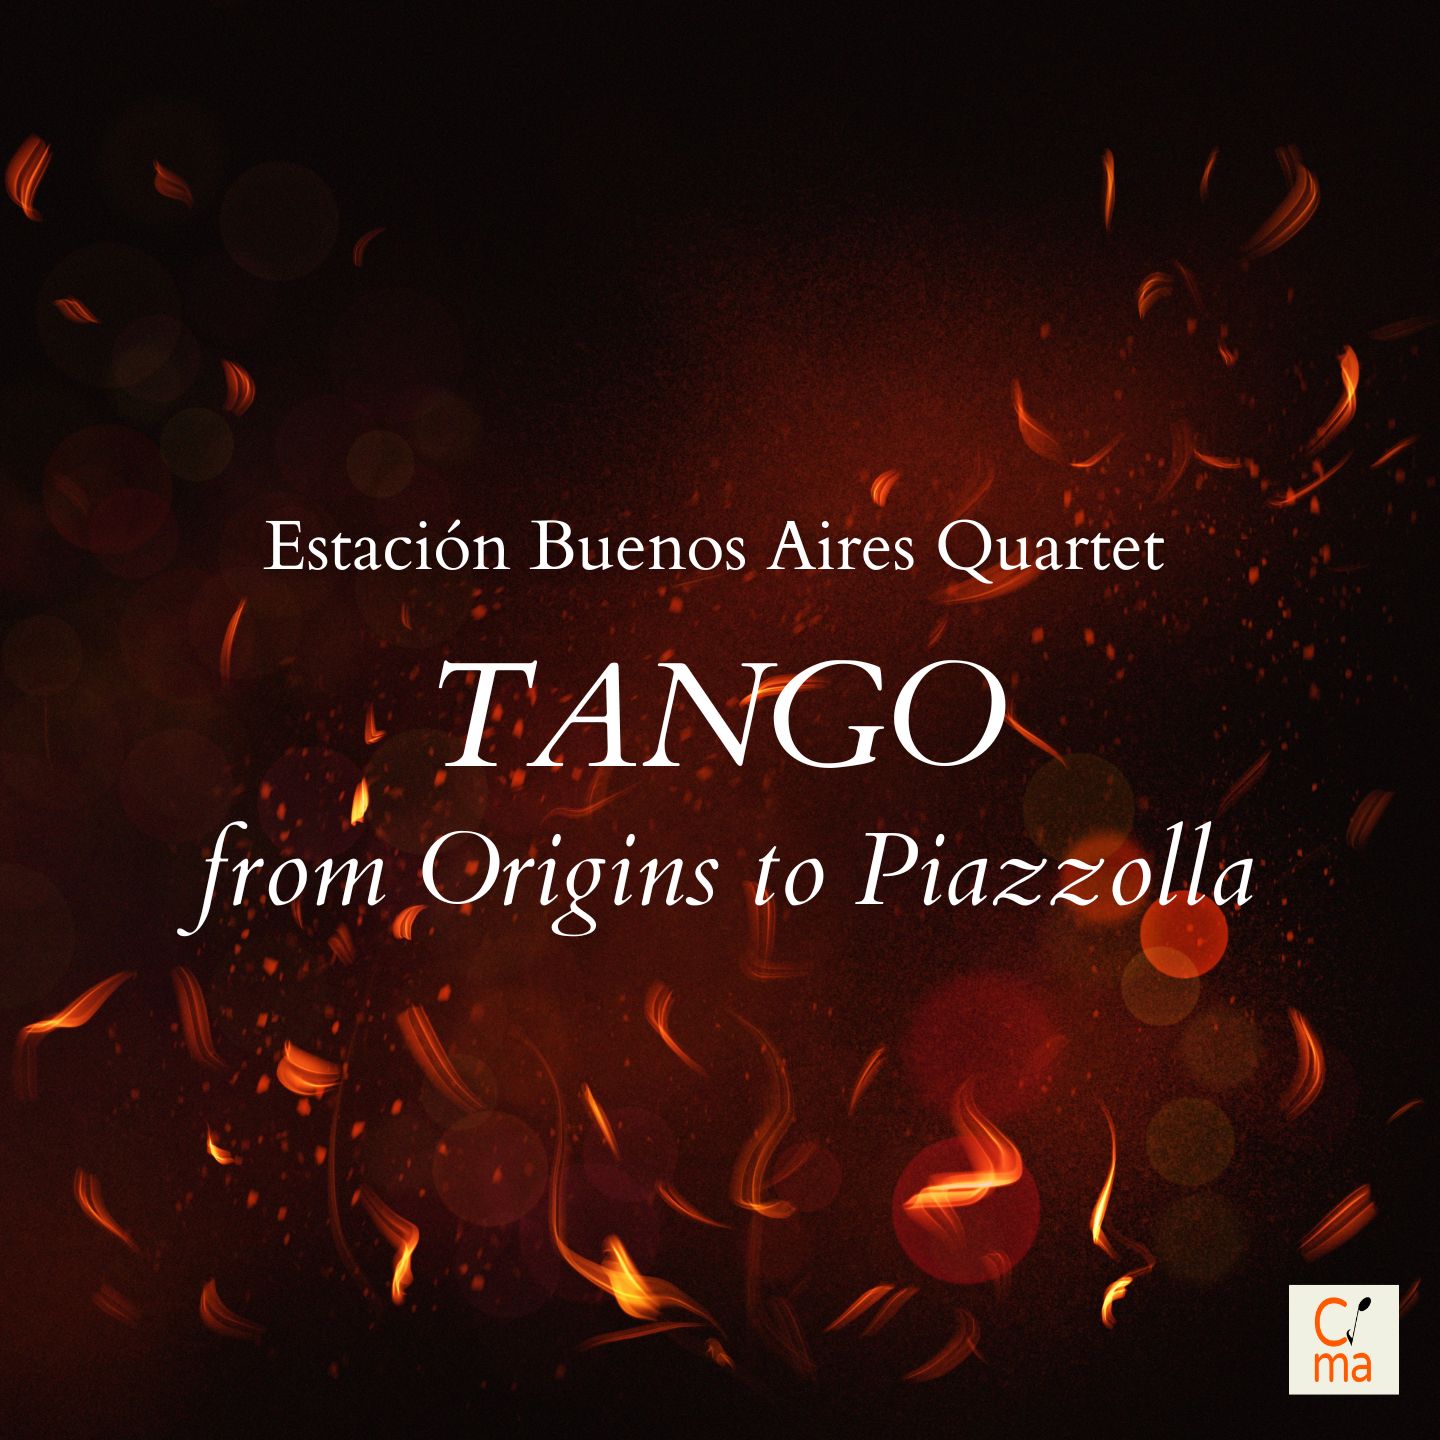 Tango: from Origins to Piazzolla